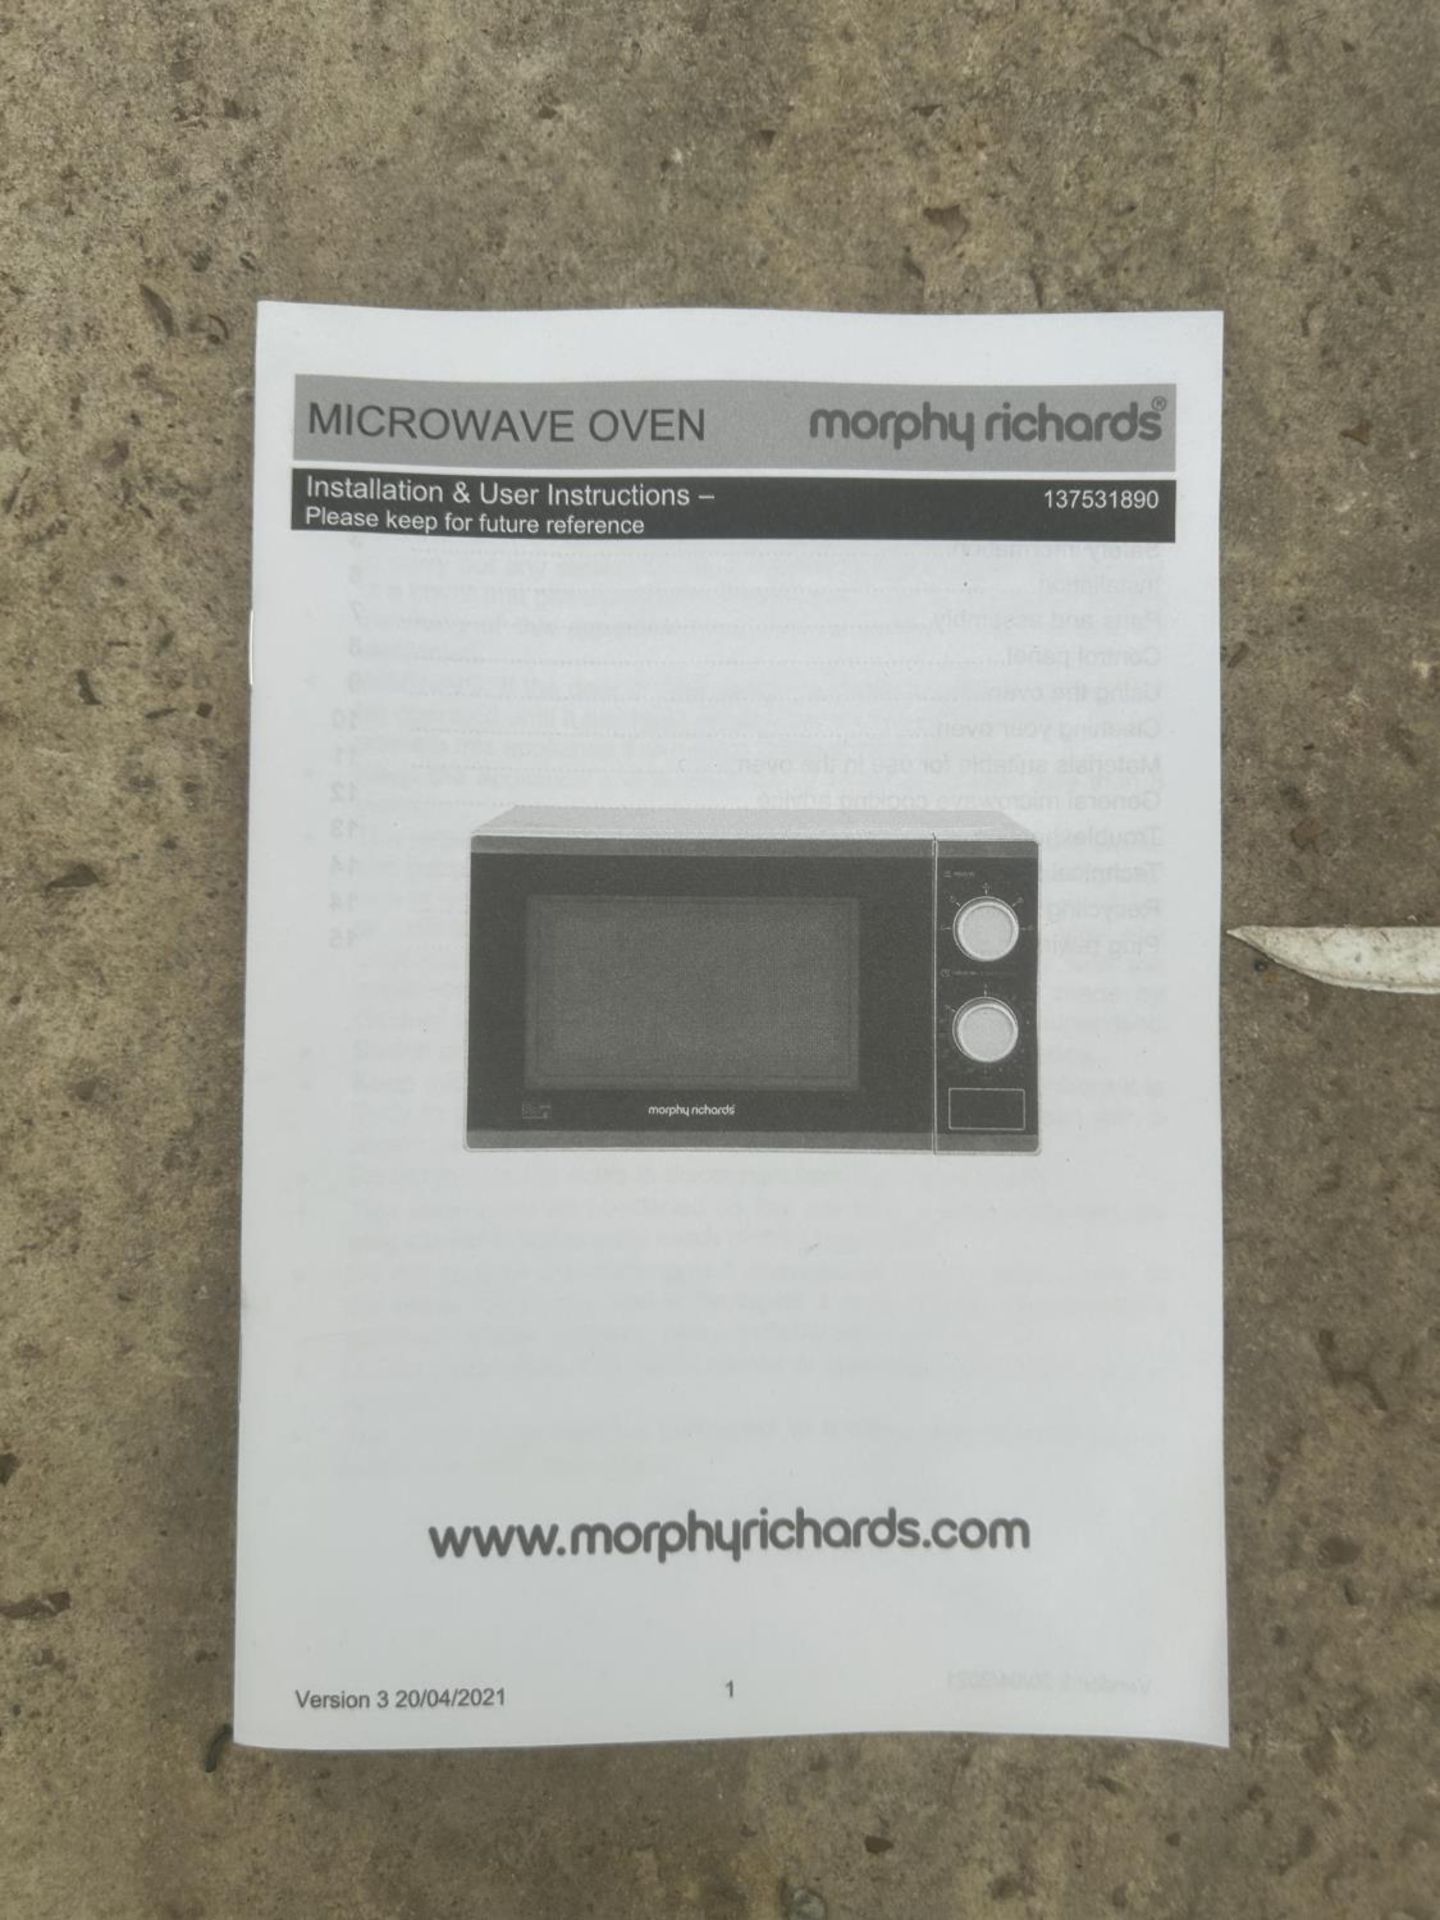 A MORPHY RICHARDS 800W MICROWAVE - Image 2 of 3